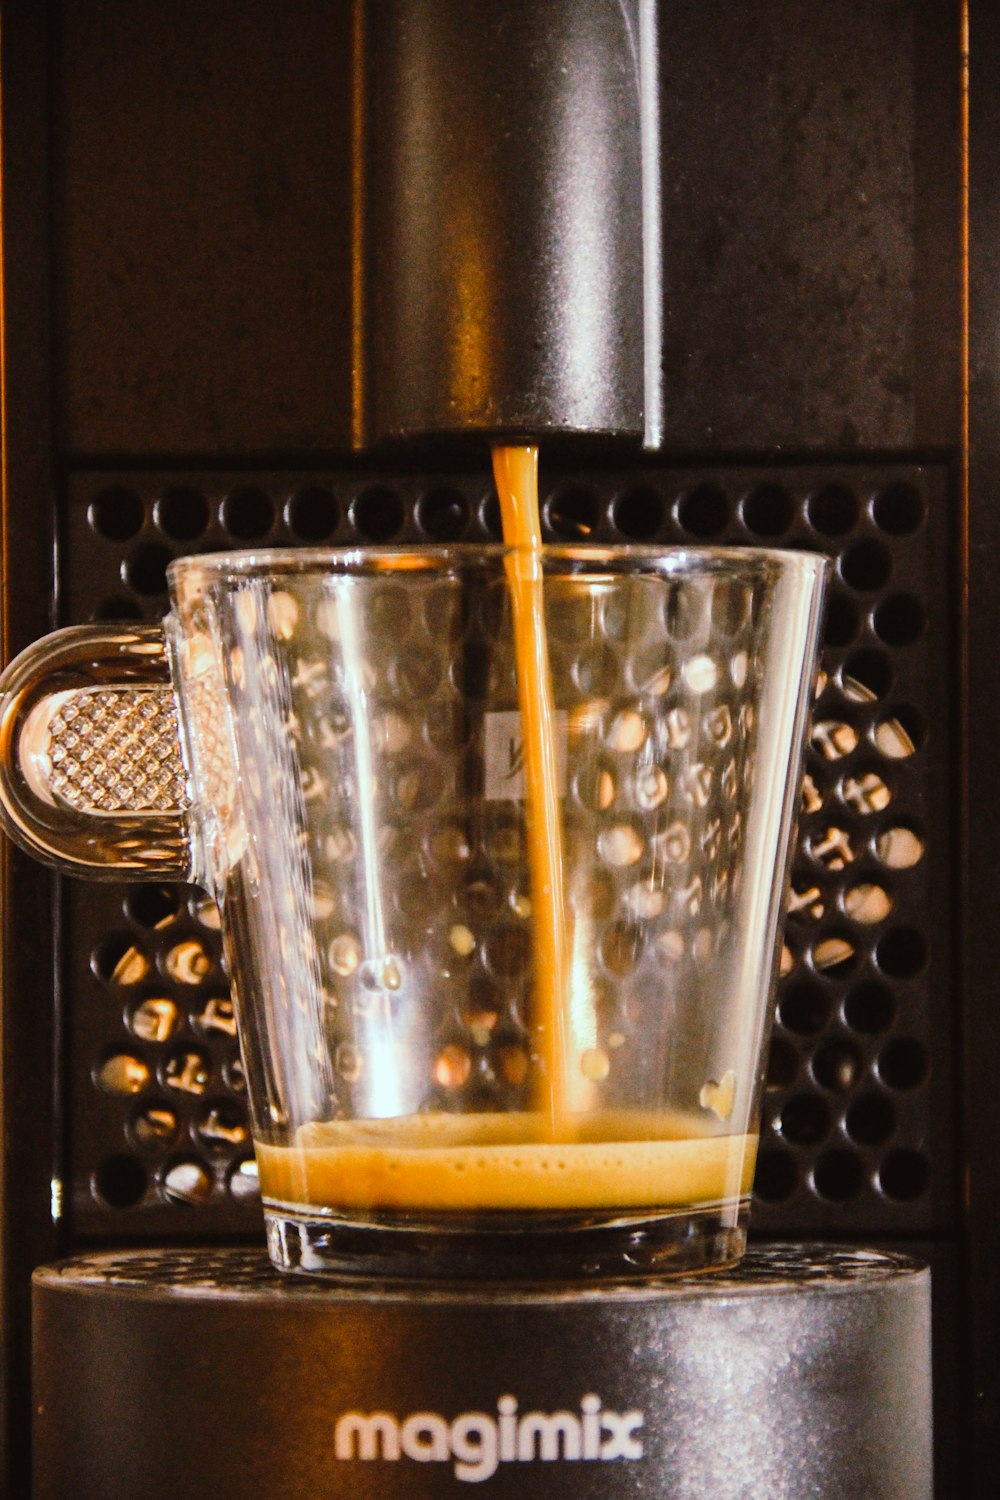 a glass of orange juice being poured into a blender